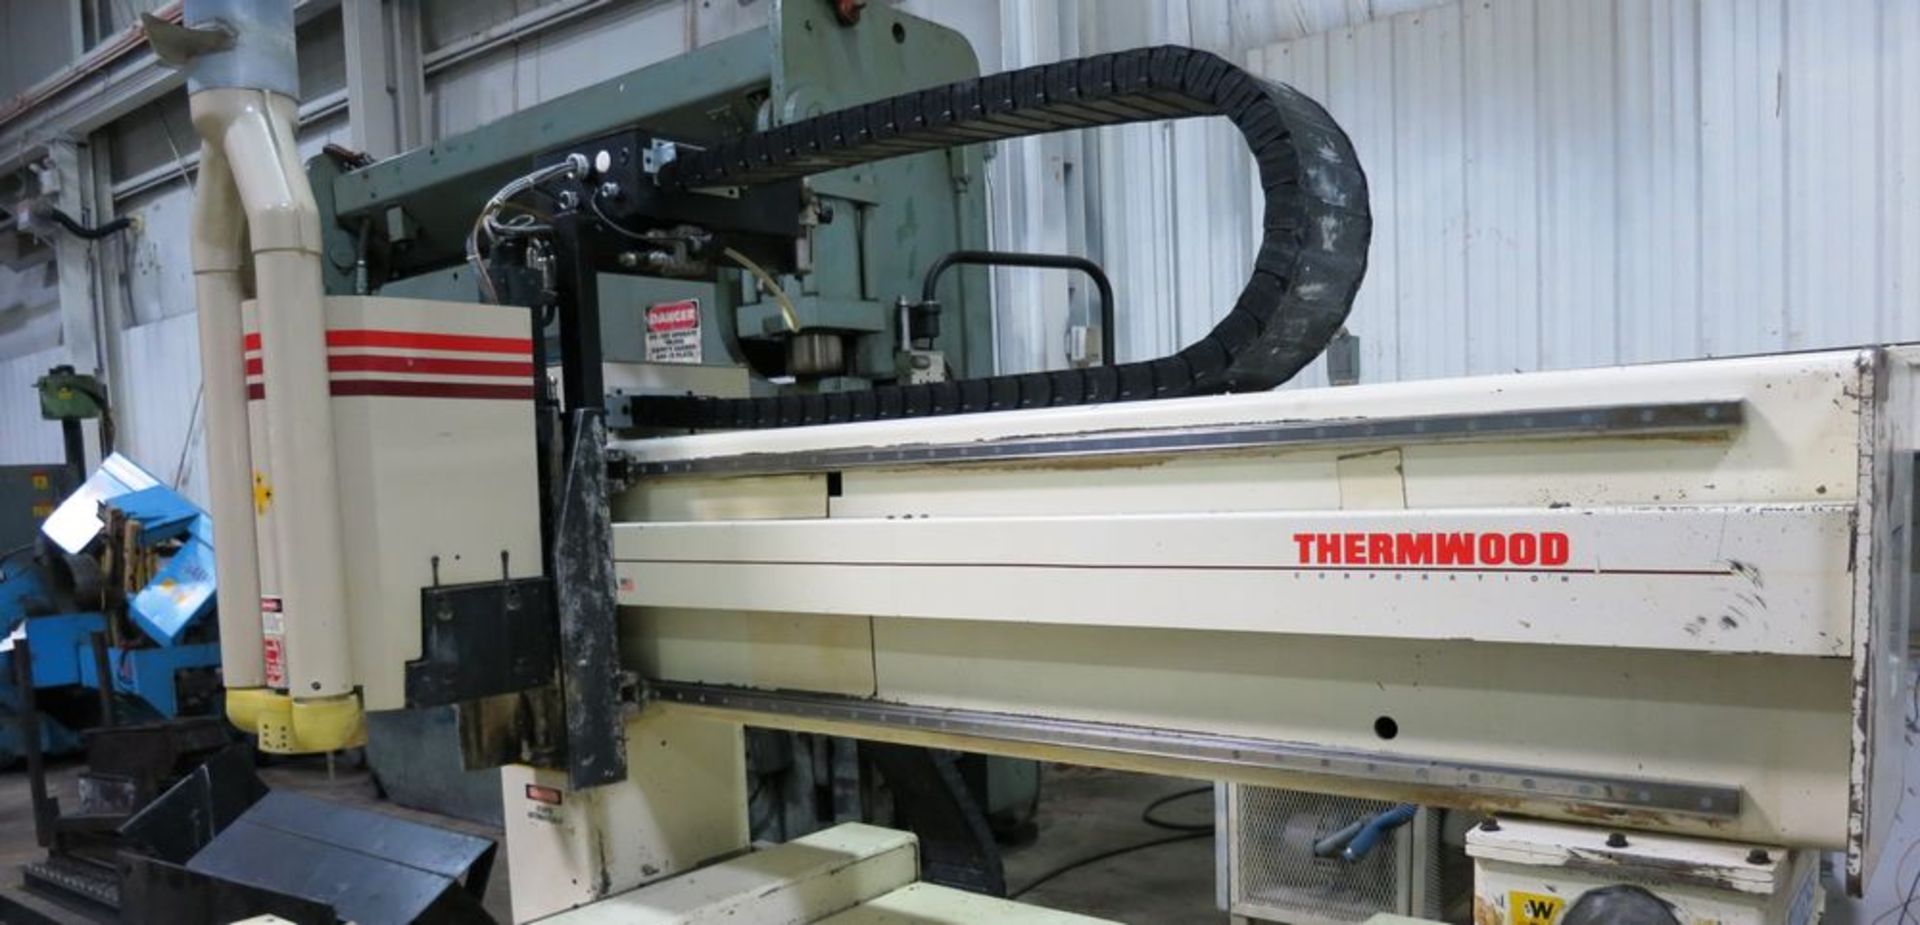 5'x10' Thermwood C-53 3-Axis CNC Router, S/N C531270498, New 1998 General - Image 4 of 8